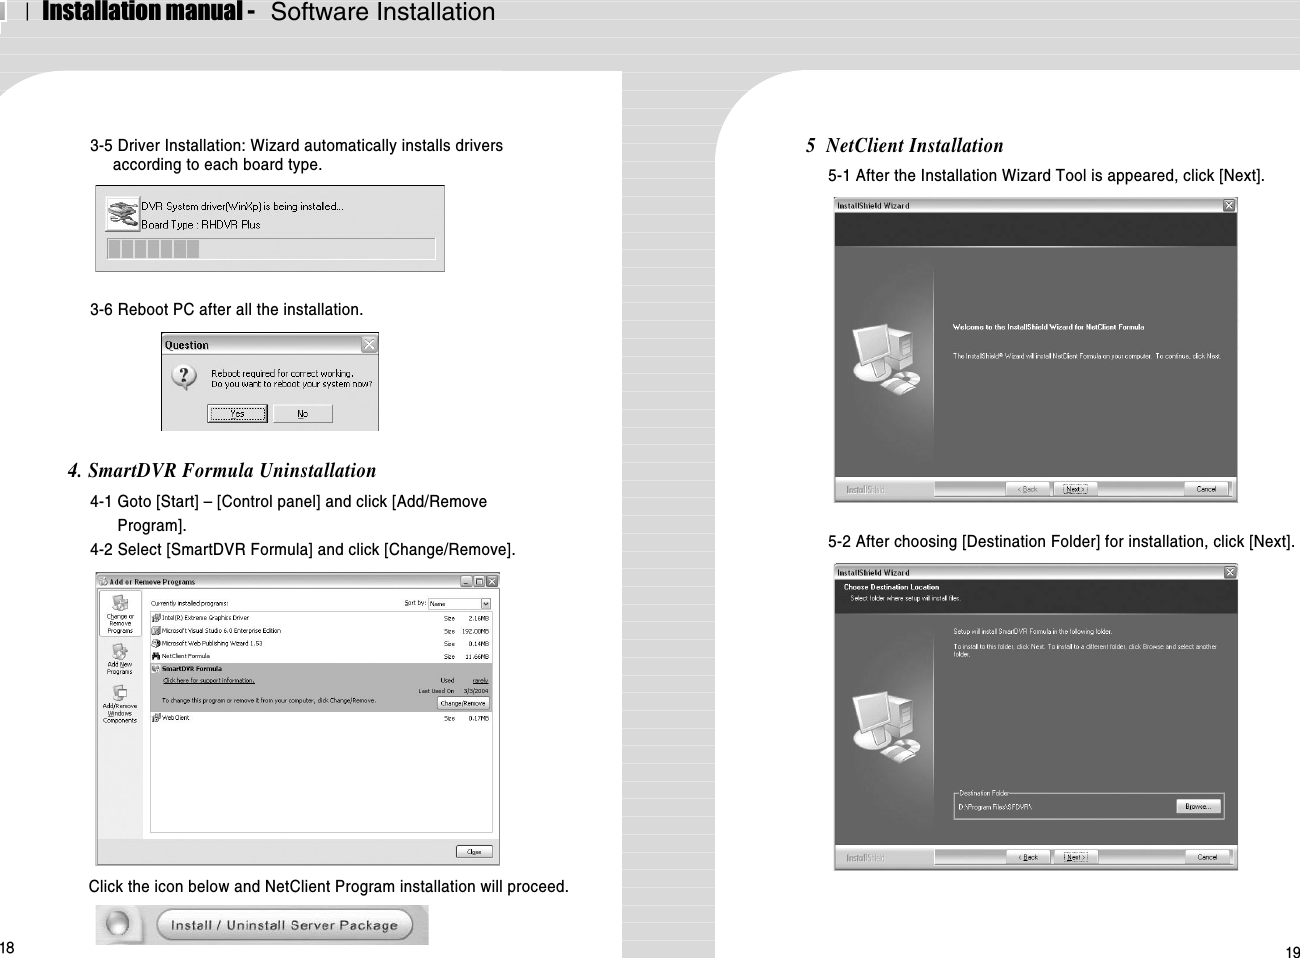 ⅠInstallation manual -   Software Installation193-5 Driver Installation: Wizard automatically installs driversaccording to each board type.3-6 Reboot PC after all the installation.4. SmartDVR Formula Uninstallation4-1 Goto [Start] – [Control panel] and click [Add/RemoveProgram].4-2 Select [SmartDVR Formula] and click [Change/Remove].Click the icon below and NetClient Program installation will proceed.5  NetClient Installation5-1 After the Installation Wizard Tool is appeared, click [Next].5-2 After choosing [Destination Folder] for installation, click [Next].18